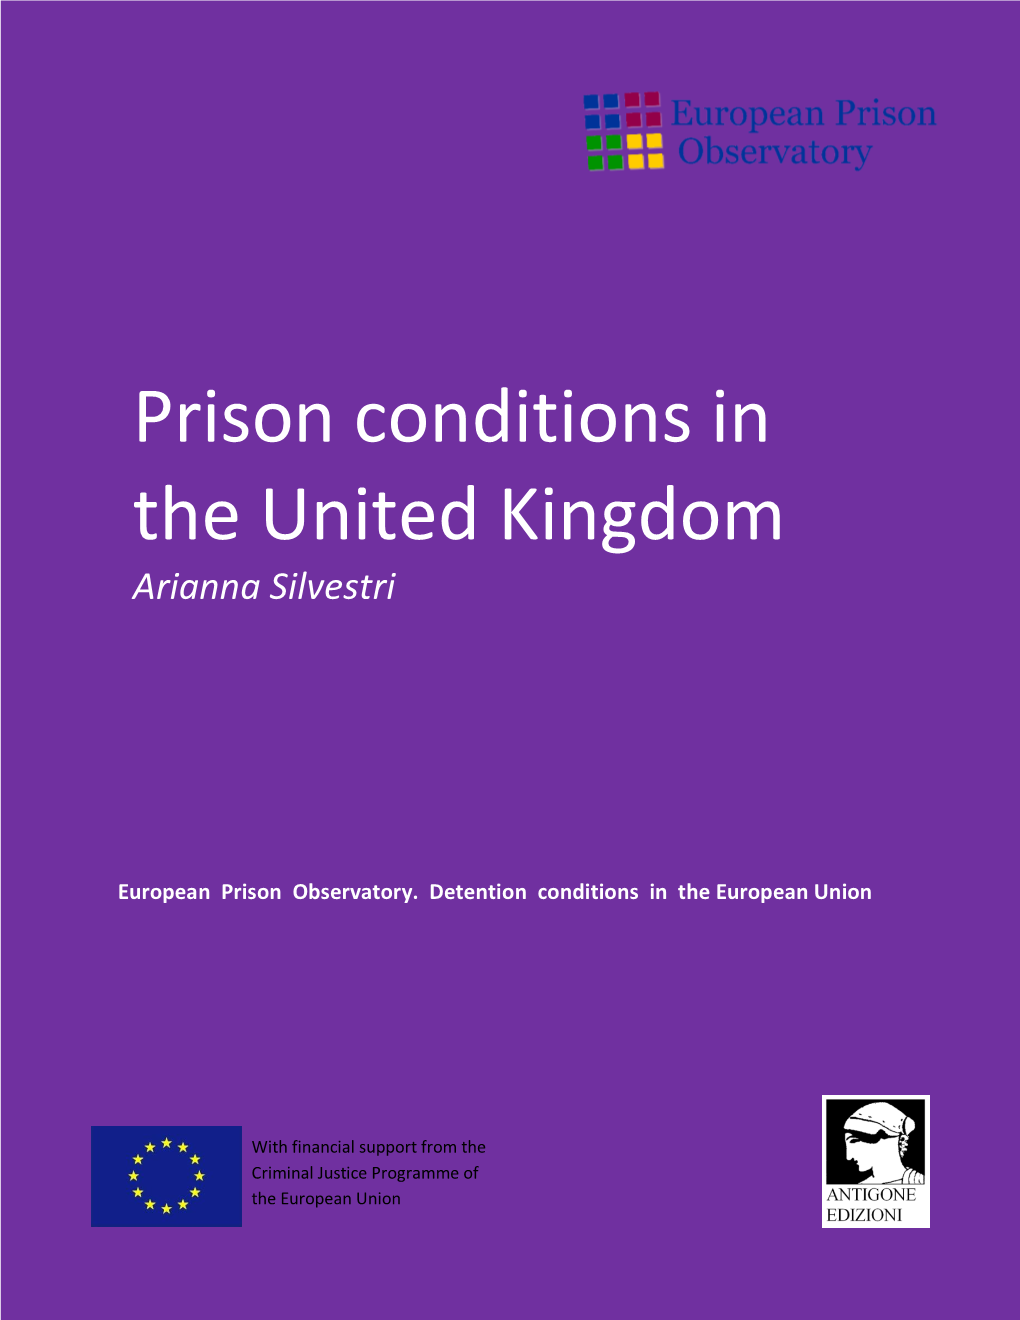 Prison Conditions in the United Kingdom, by Arianna Silvestri, Is Licensed Under a Creative Commons Attribution-Noncommercial-Noderivs 3.0 Unported License